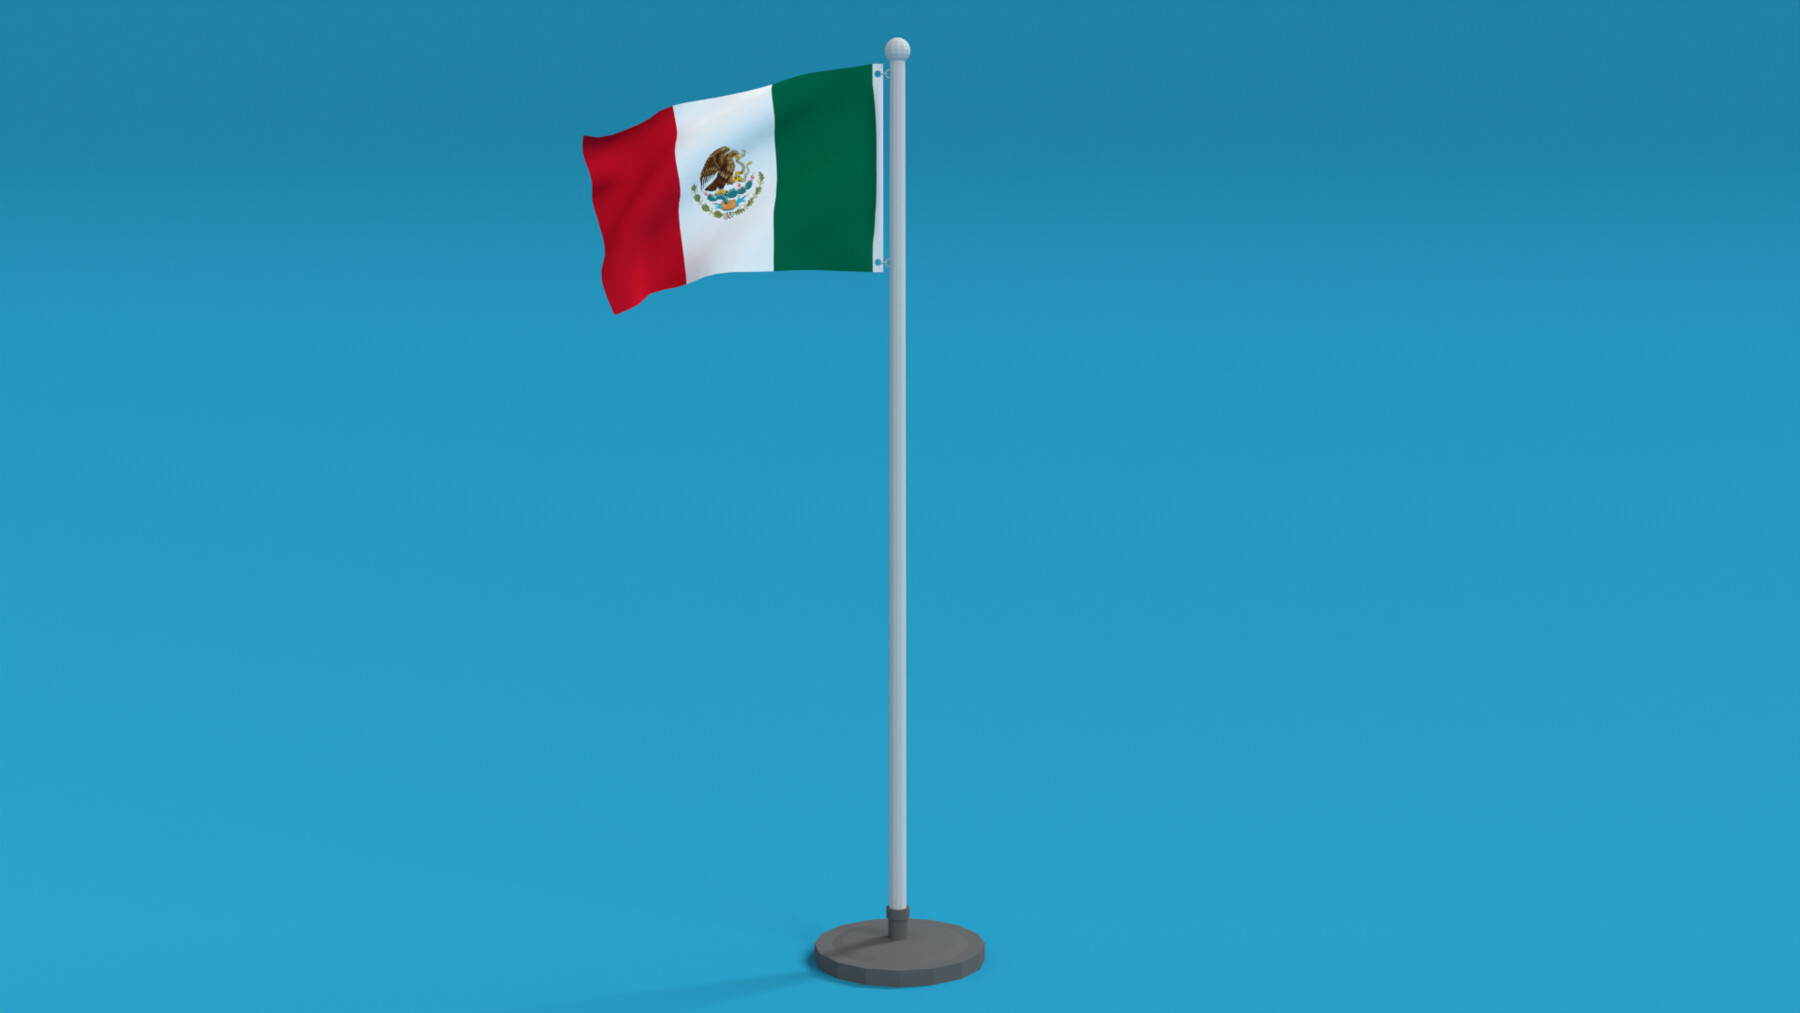 ArtStation - Low Poly Seamless Animated Mexico Flag | Game Assets